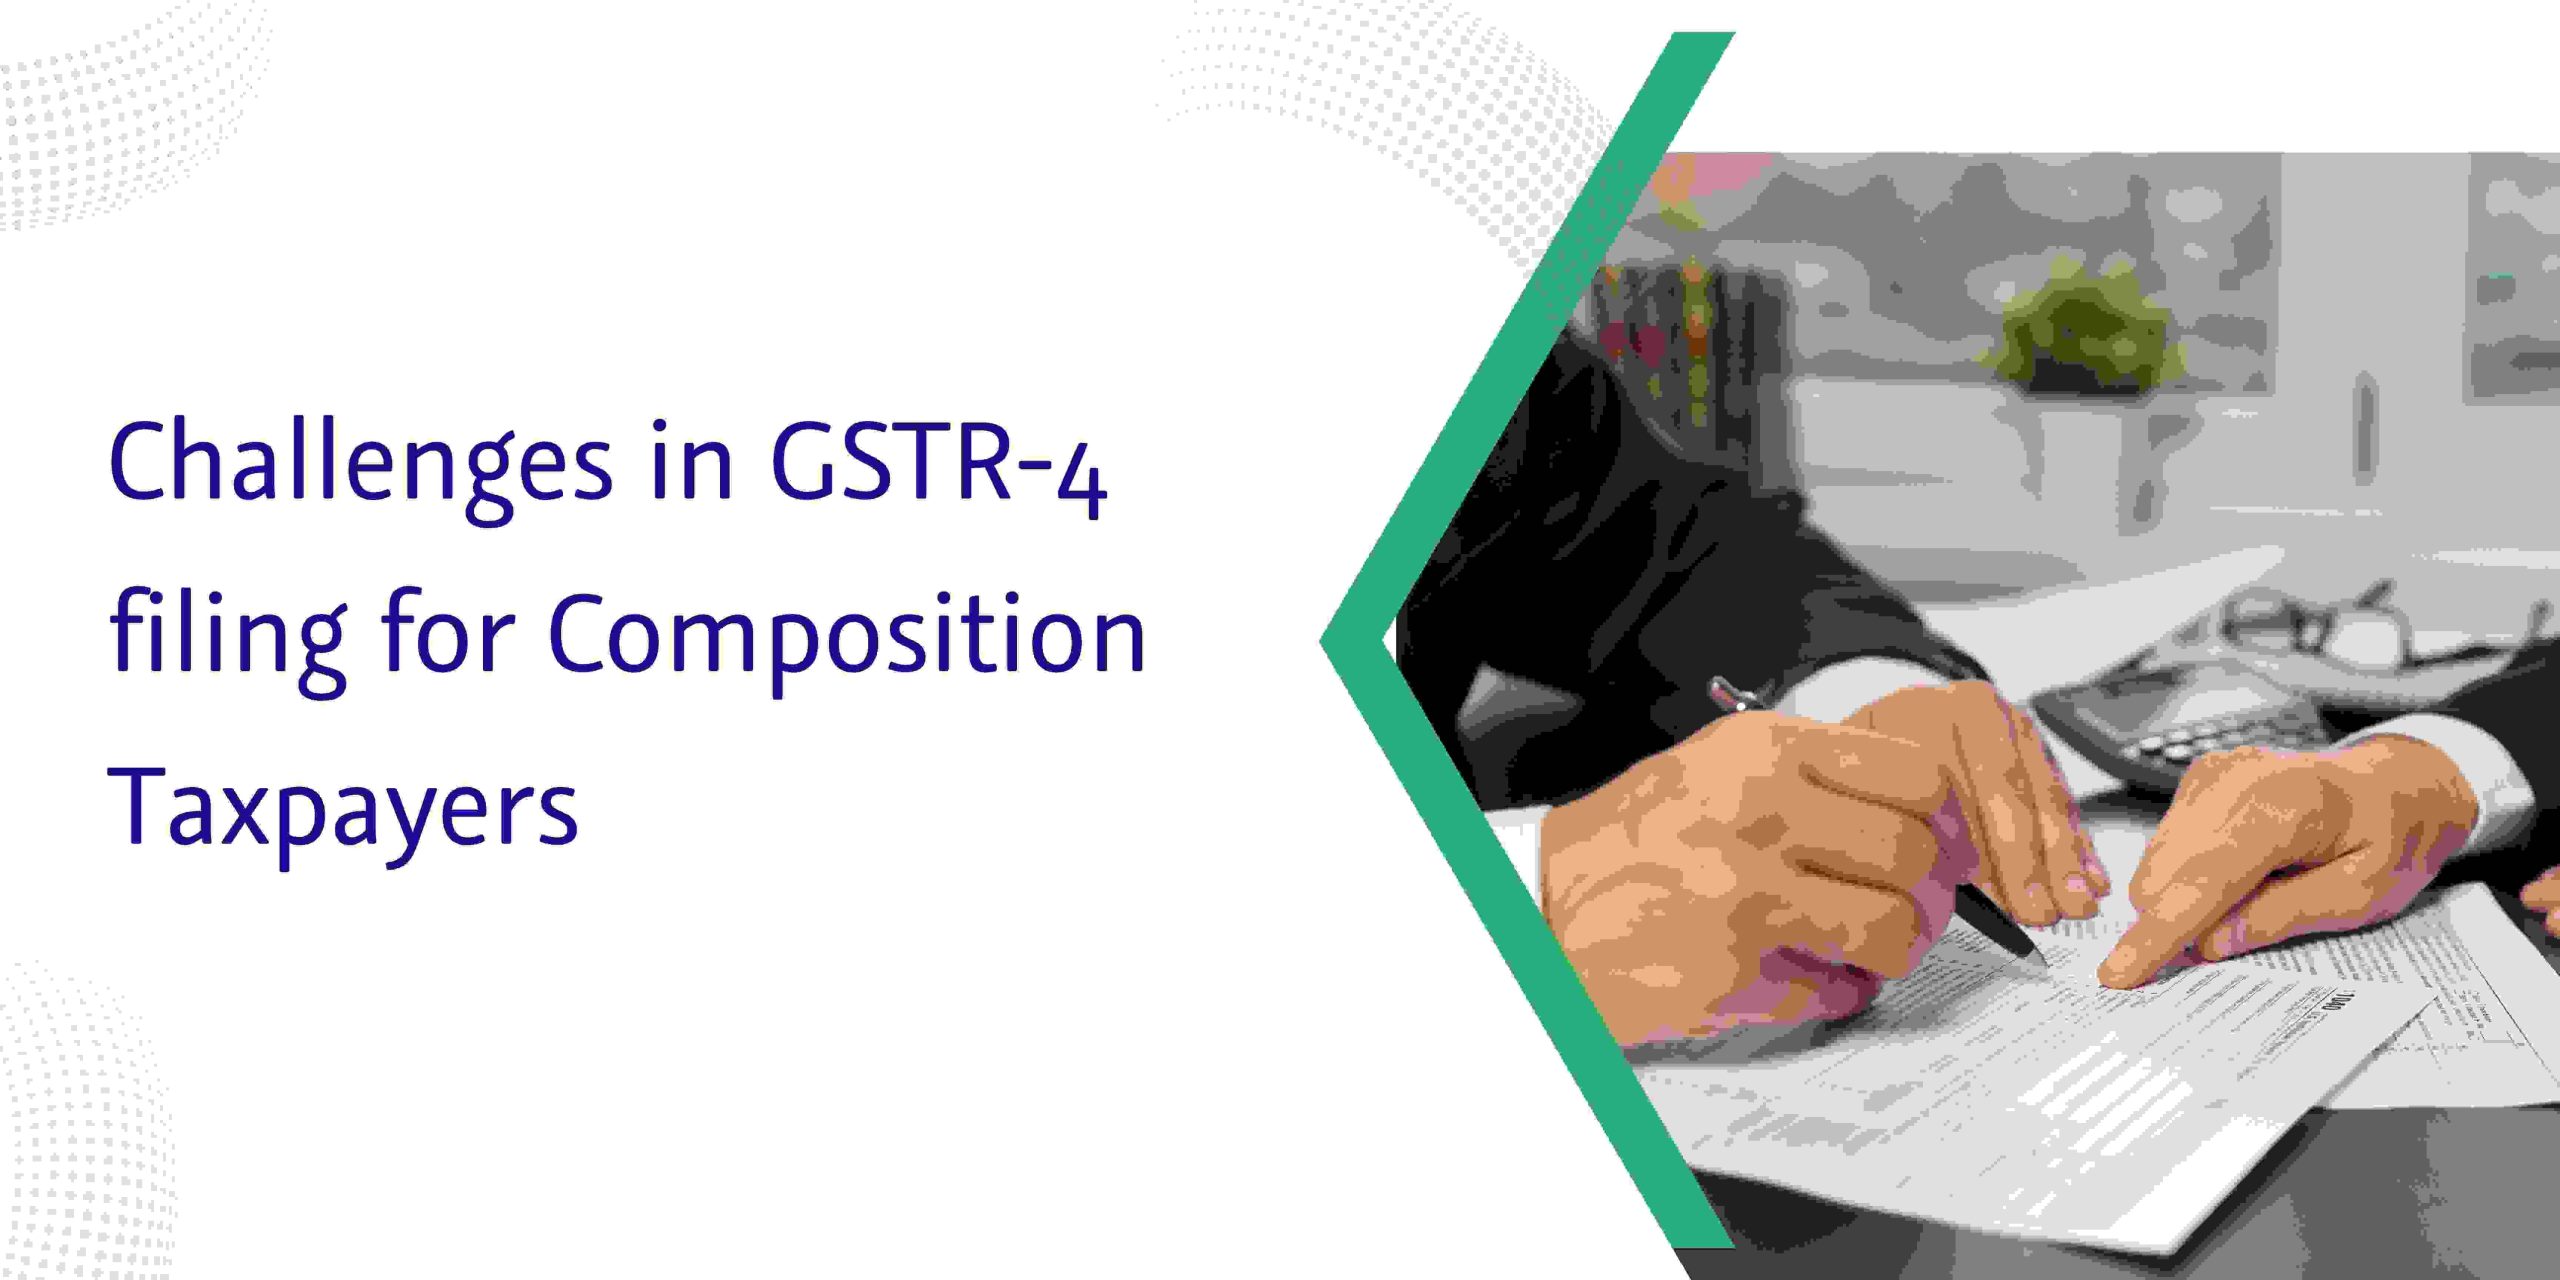 You are currently viewing Challenges in GSTR-4 filing for Composition Taxpayers